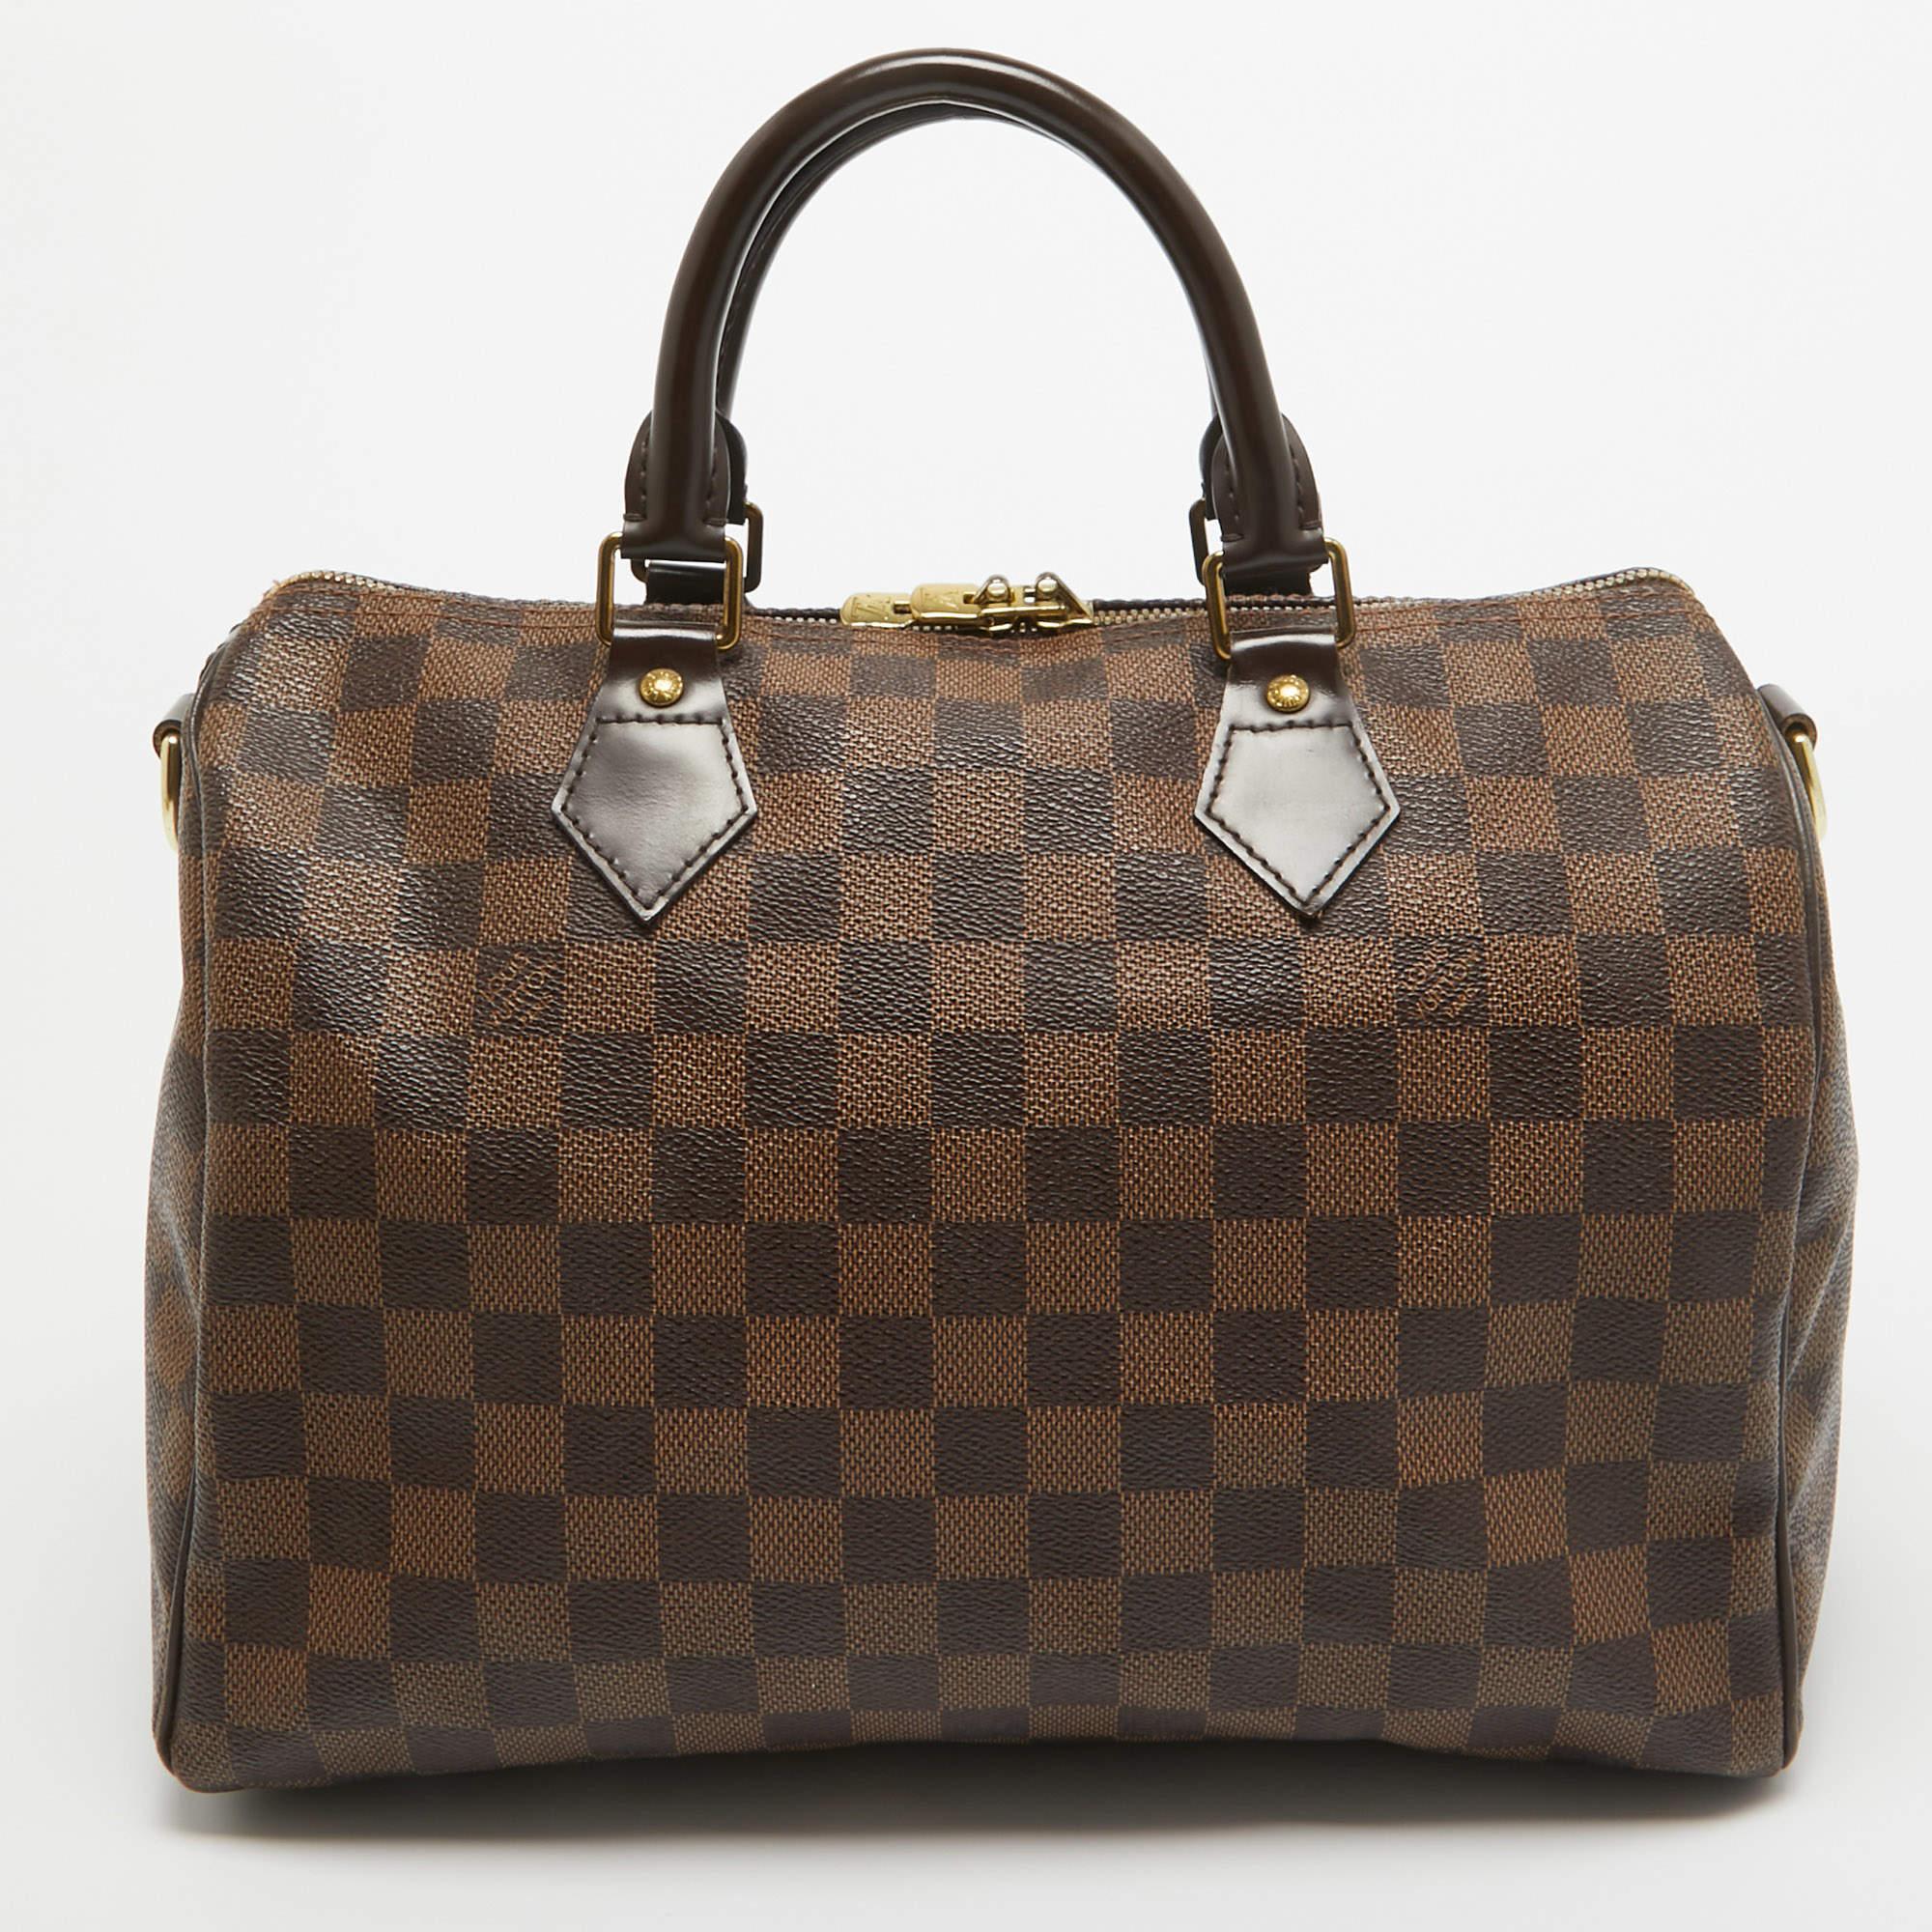 This stylish bag from Louis Vuitton has been crafted from Damier Ebene canvas. It opens to a capacious interior that can easily hold your everyday essentials. The bag is finished with gold-tone hardware and dual handles.

Includes: invoice, Original